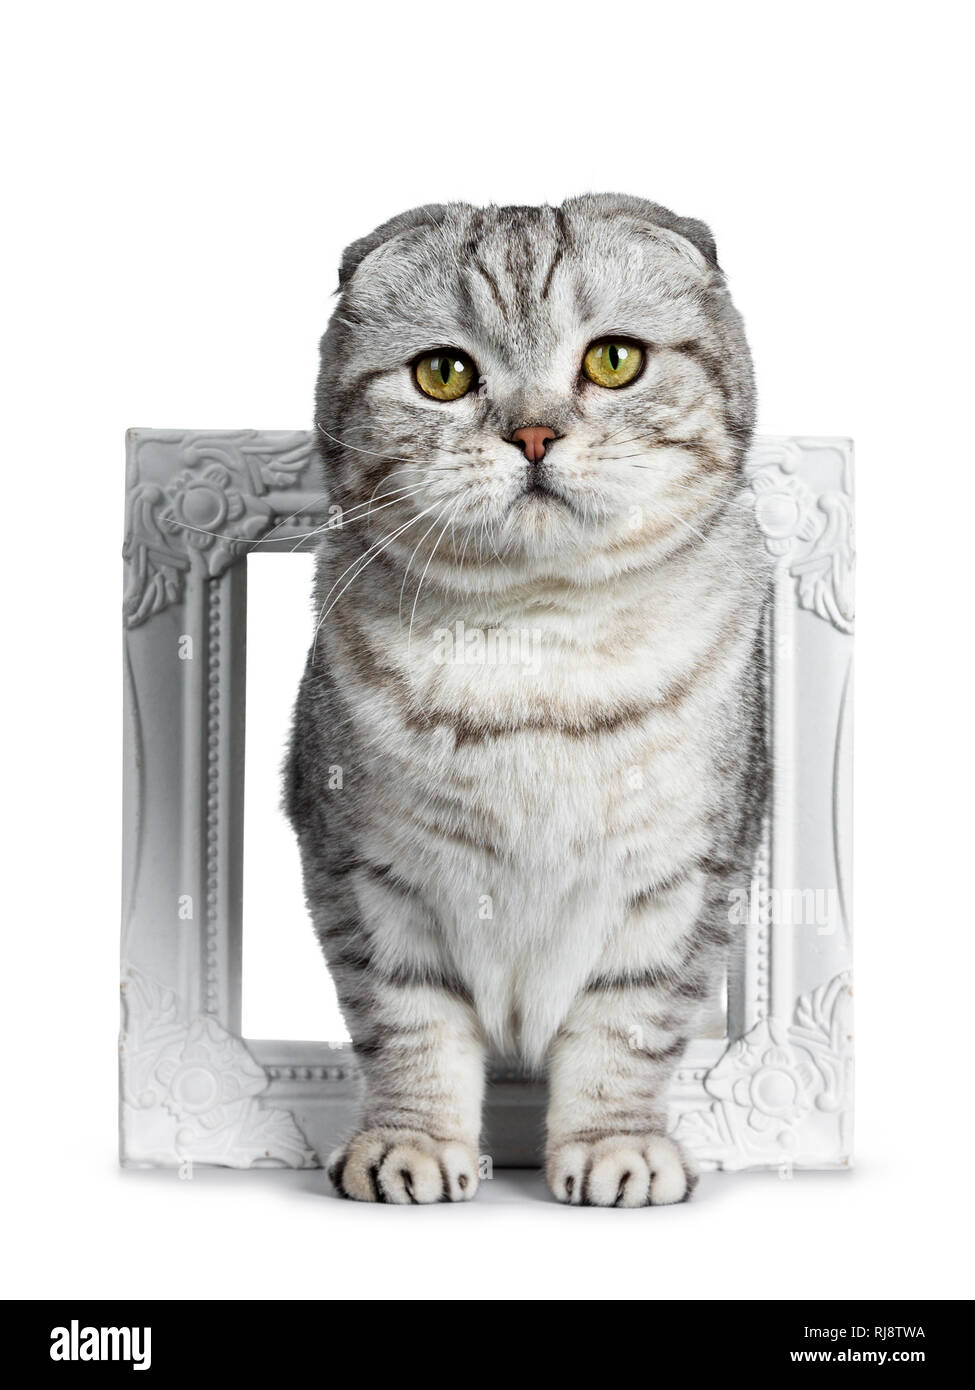 Cute Young Silver Tabby Scottish Fold Cat Kitten Standing Facing Front Through White Photo Frame Looking At Camera With Yellow Eyes Isolated On A Whi Stock Photo Alamy